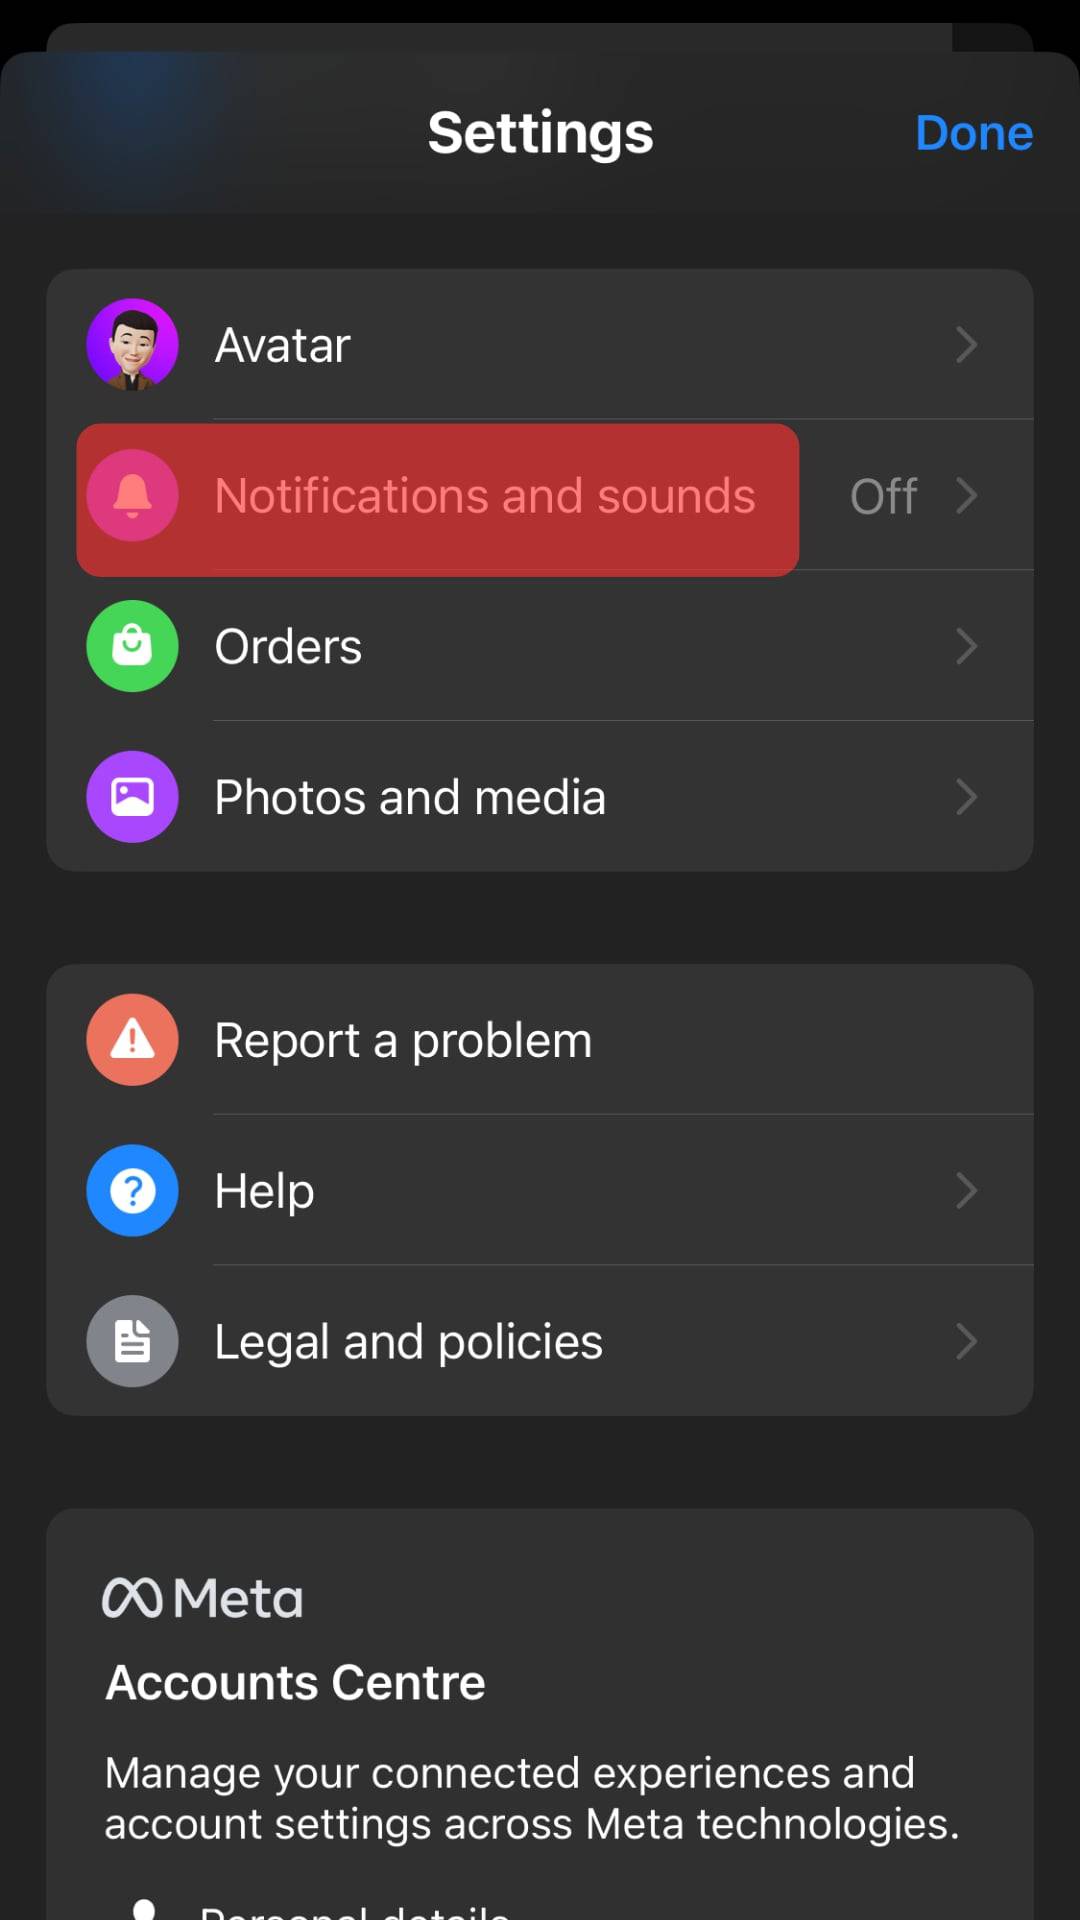 Tap On The Notifications And Sounds Option.